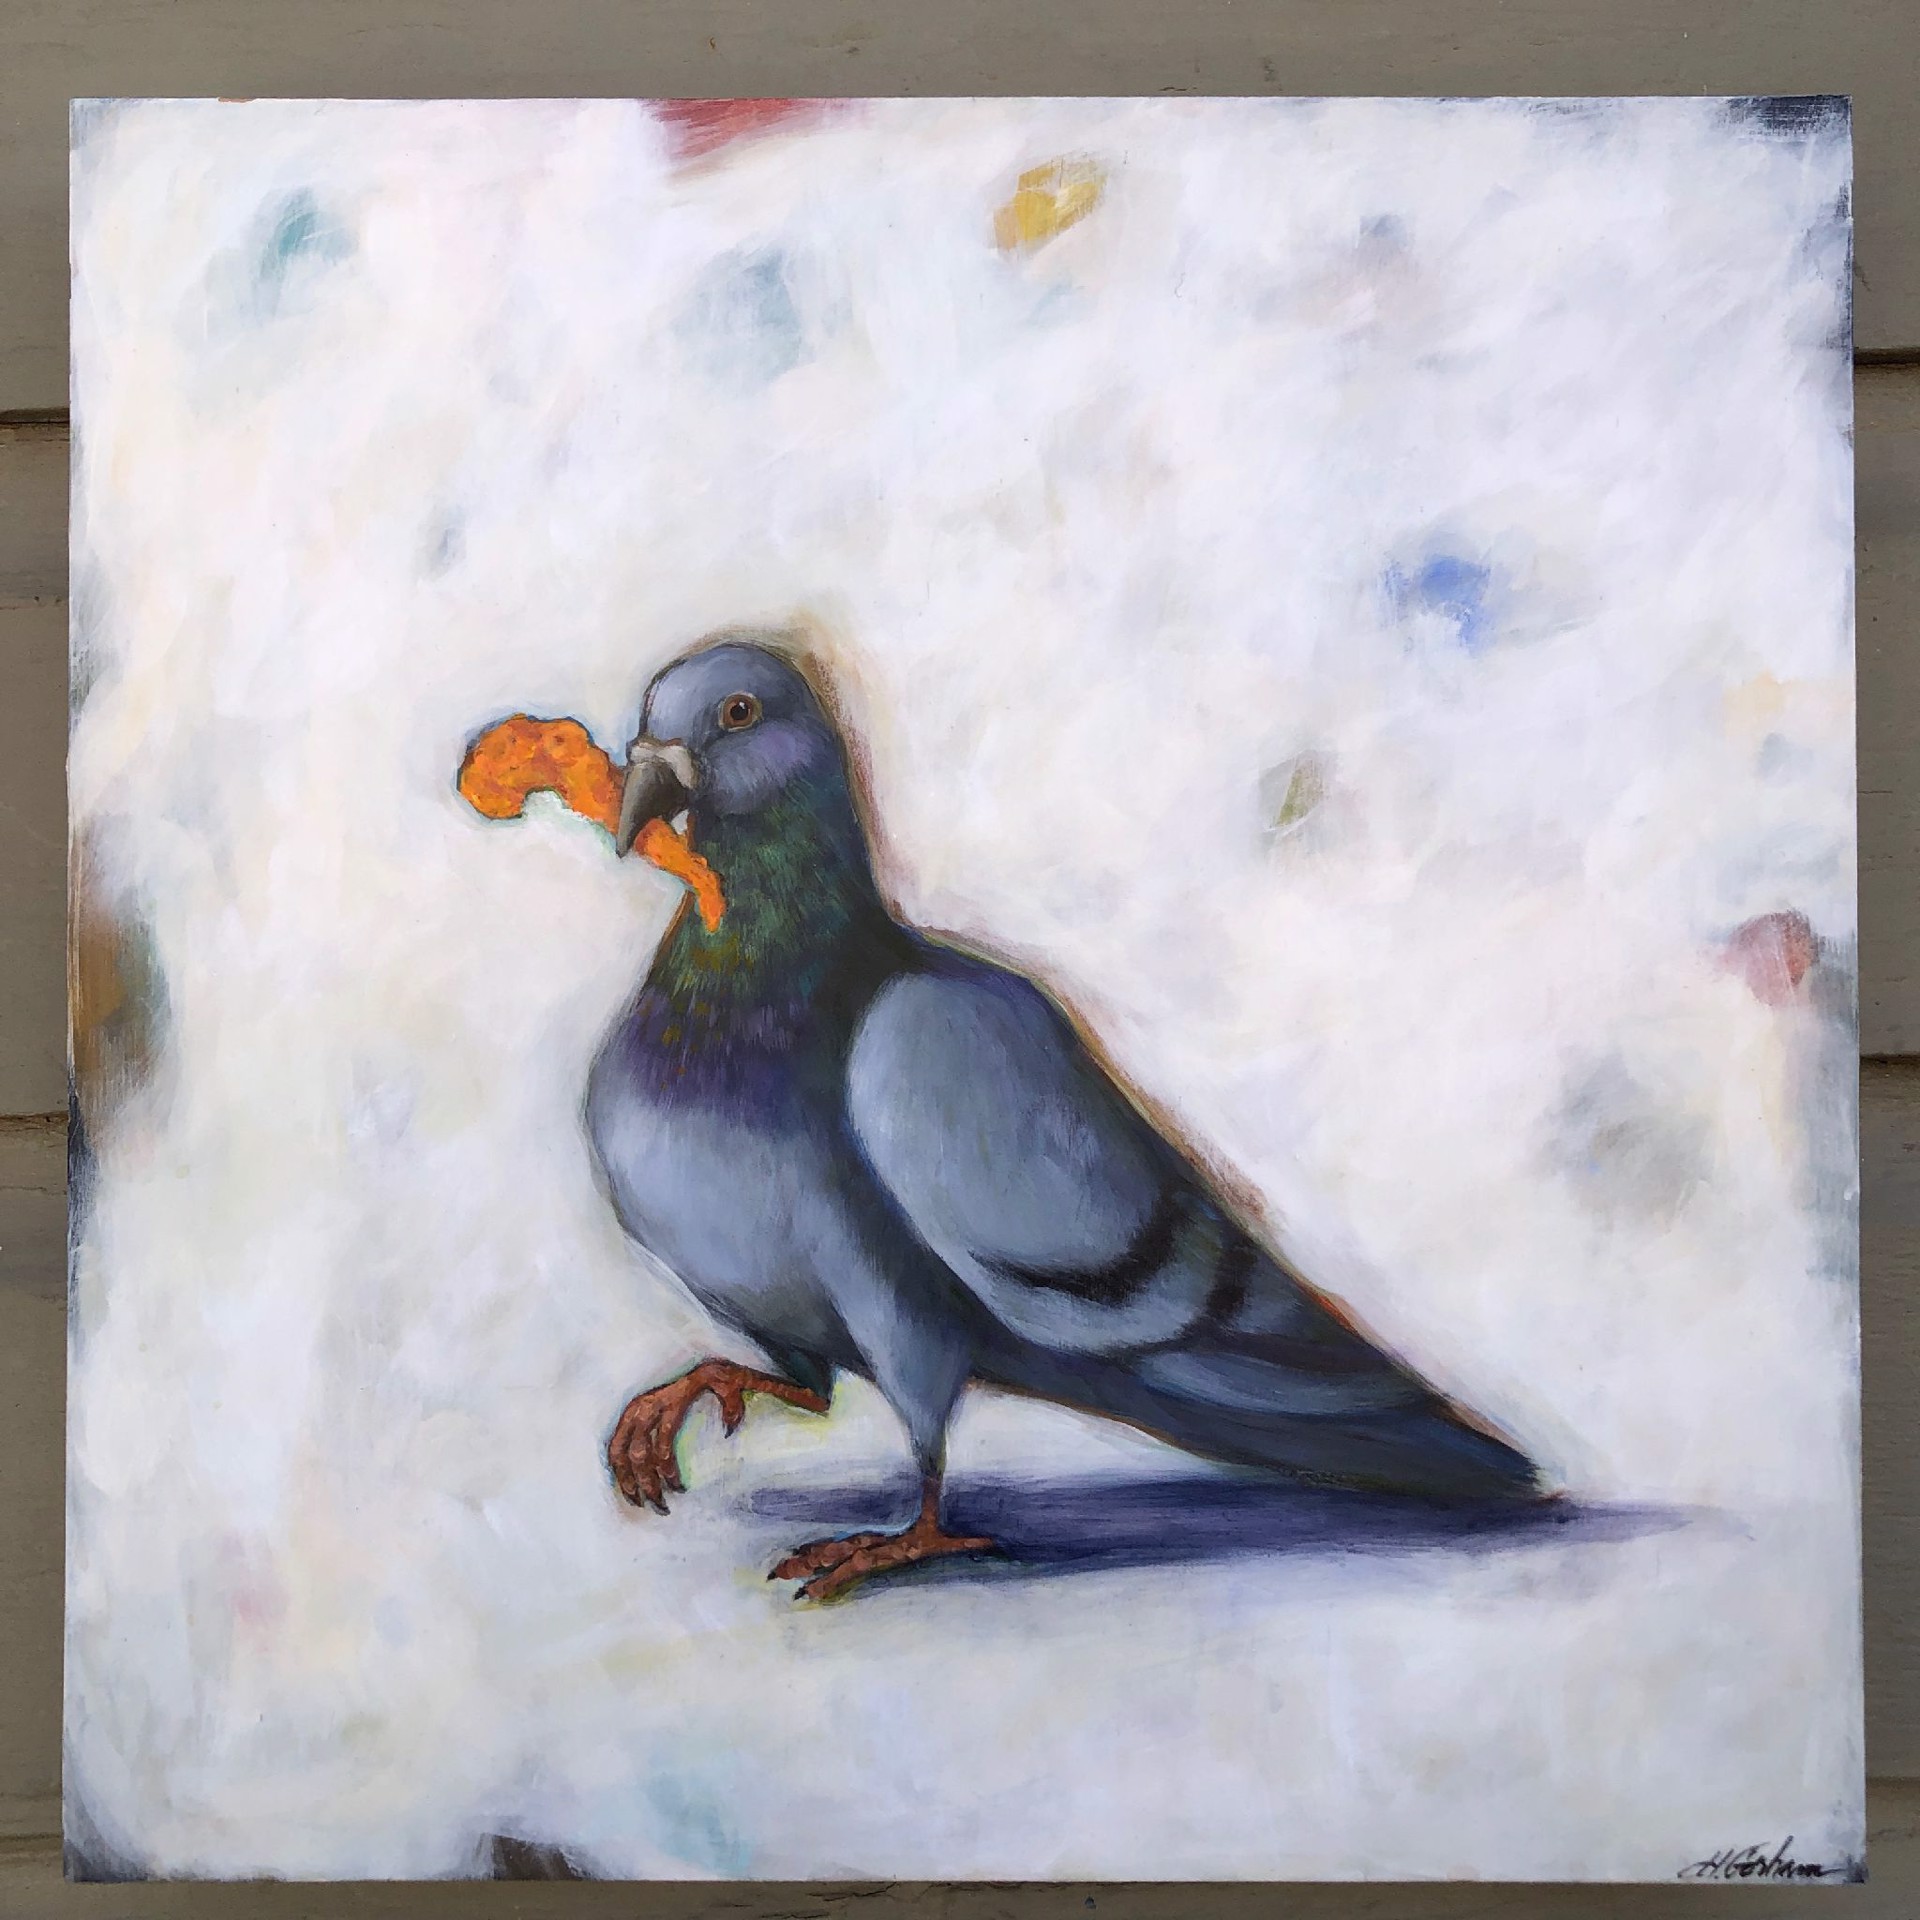 Pigeons Making Questionable Life Decisions, Cheeto by Heather Gorham